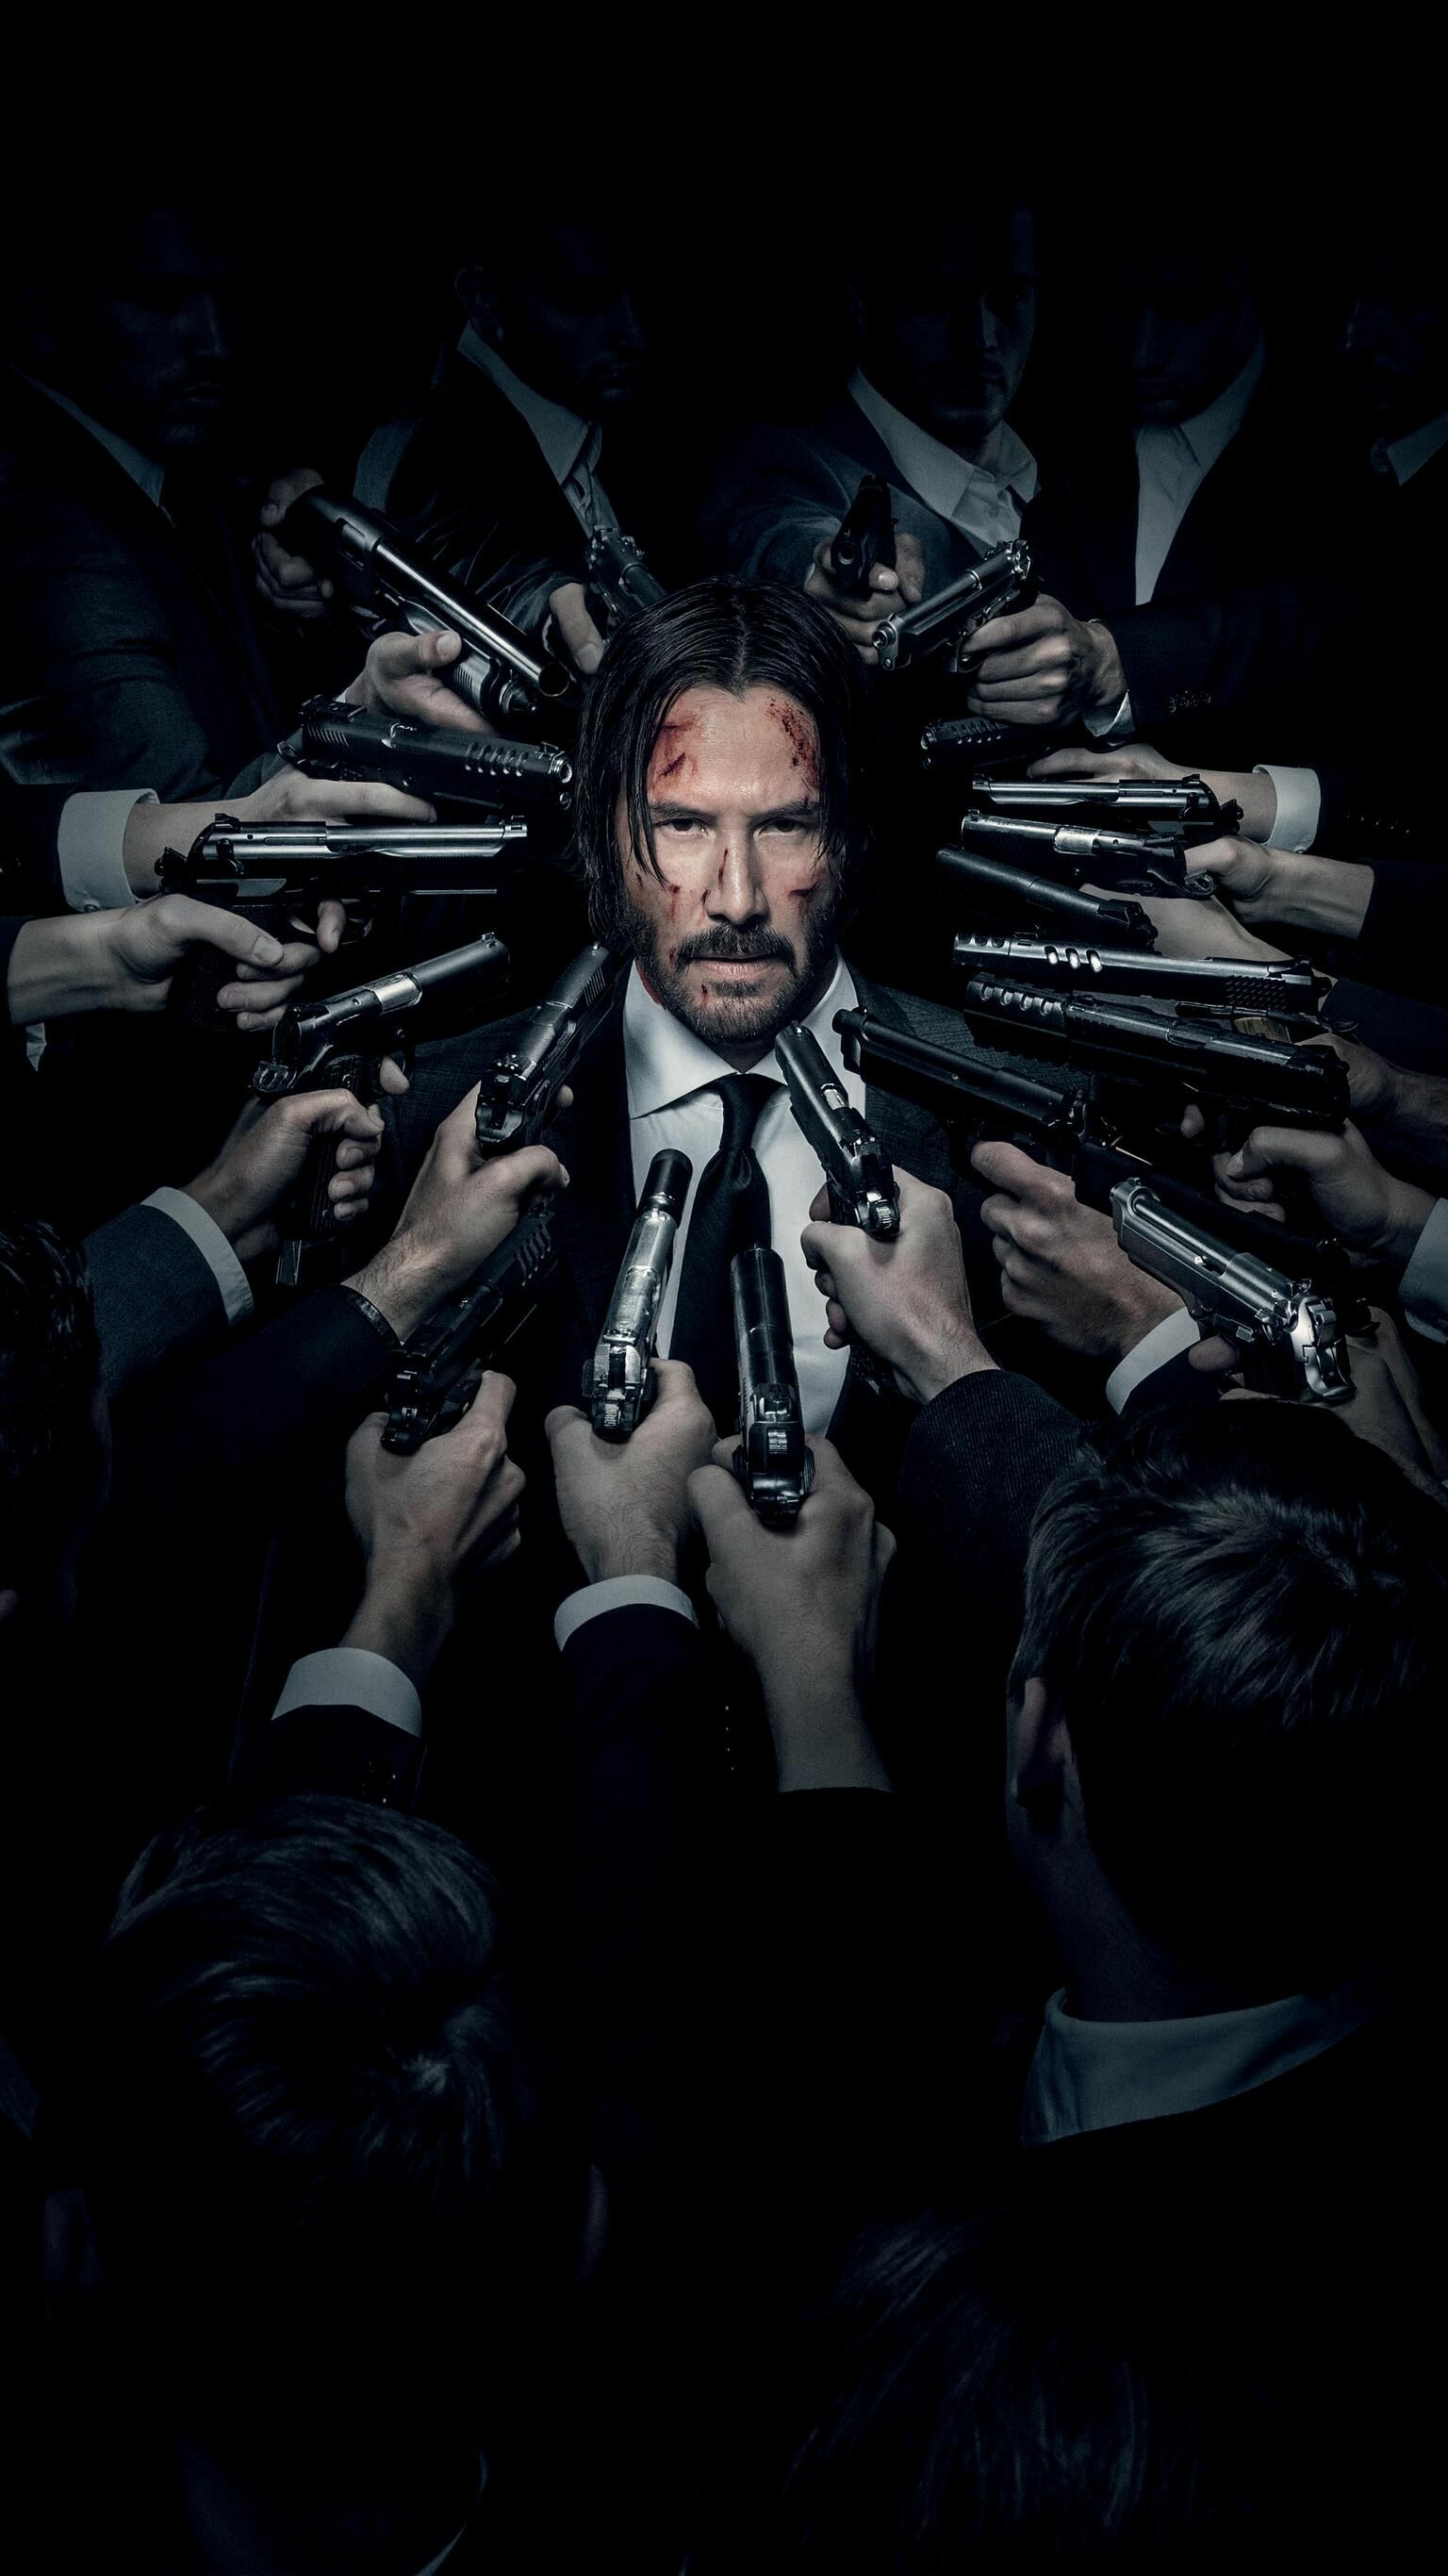 Keanu Reeves: John Wick, a former hitman who is forced back into the criminal underworld he had abandoned. 1540x2740 HD Wallpaper.